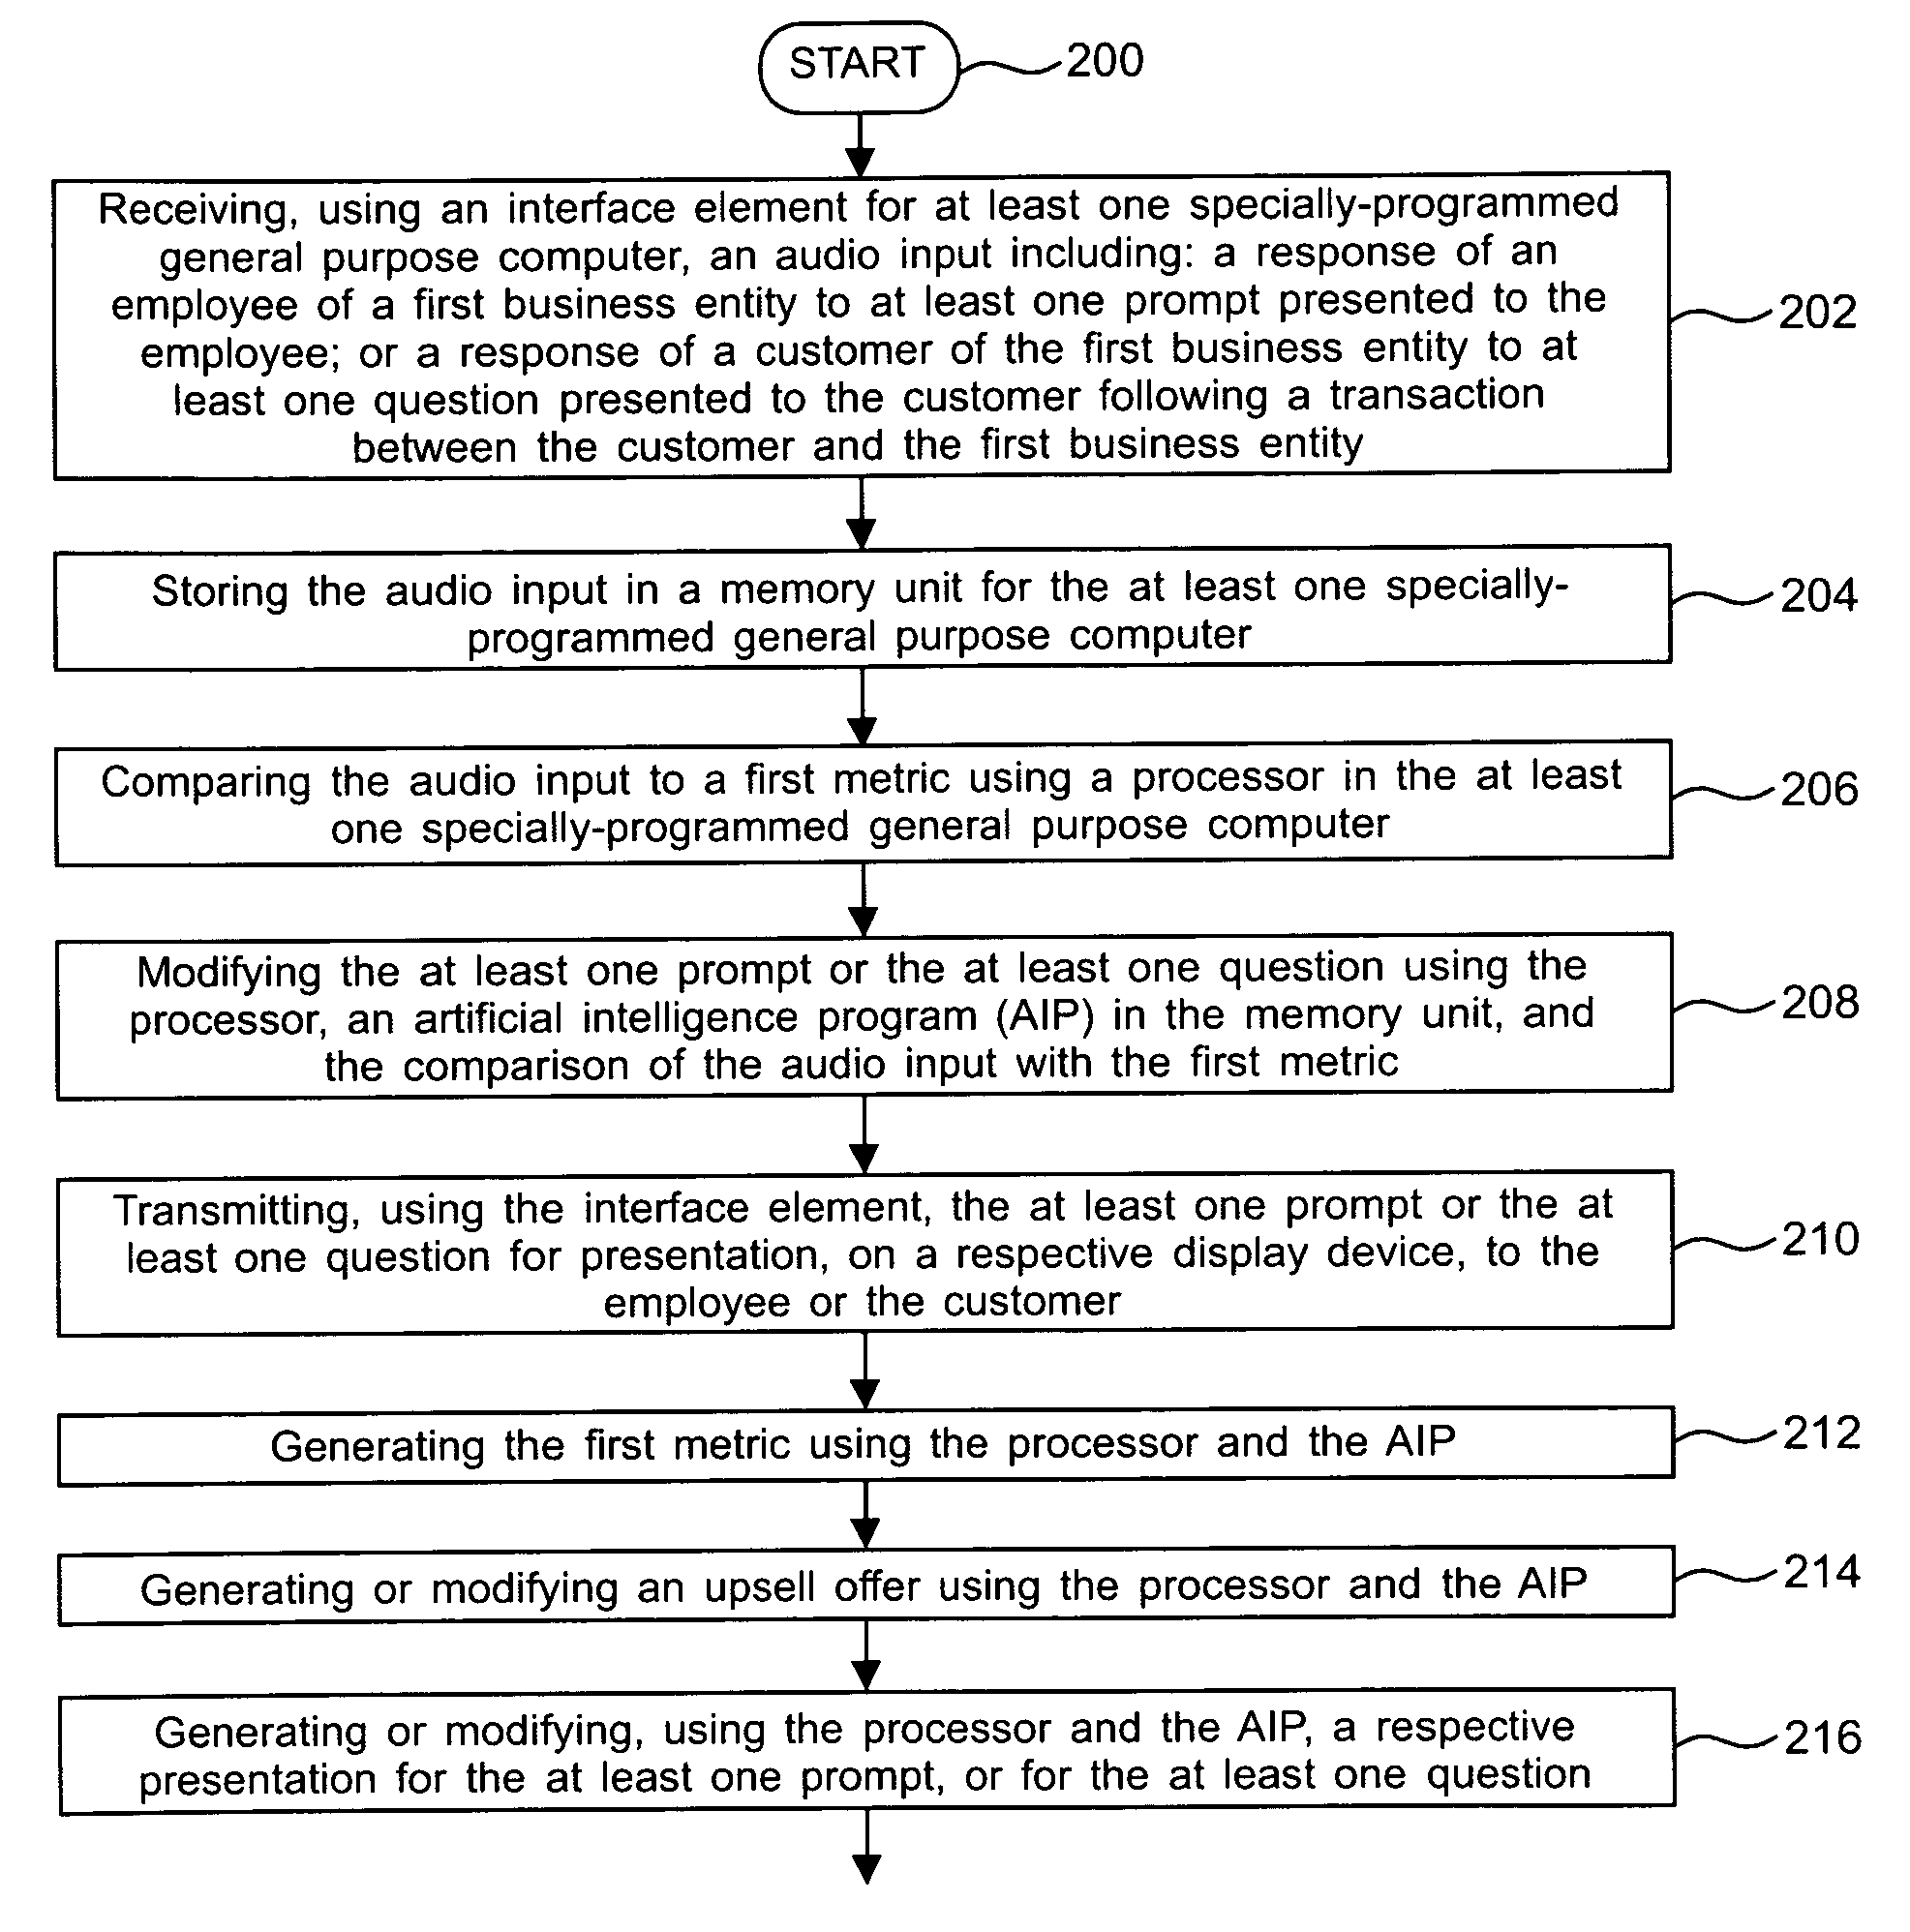 Method and system for using artificial intelligence to generate or modify an employee prompt or a customer survey